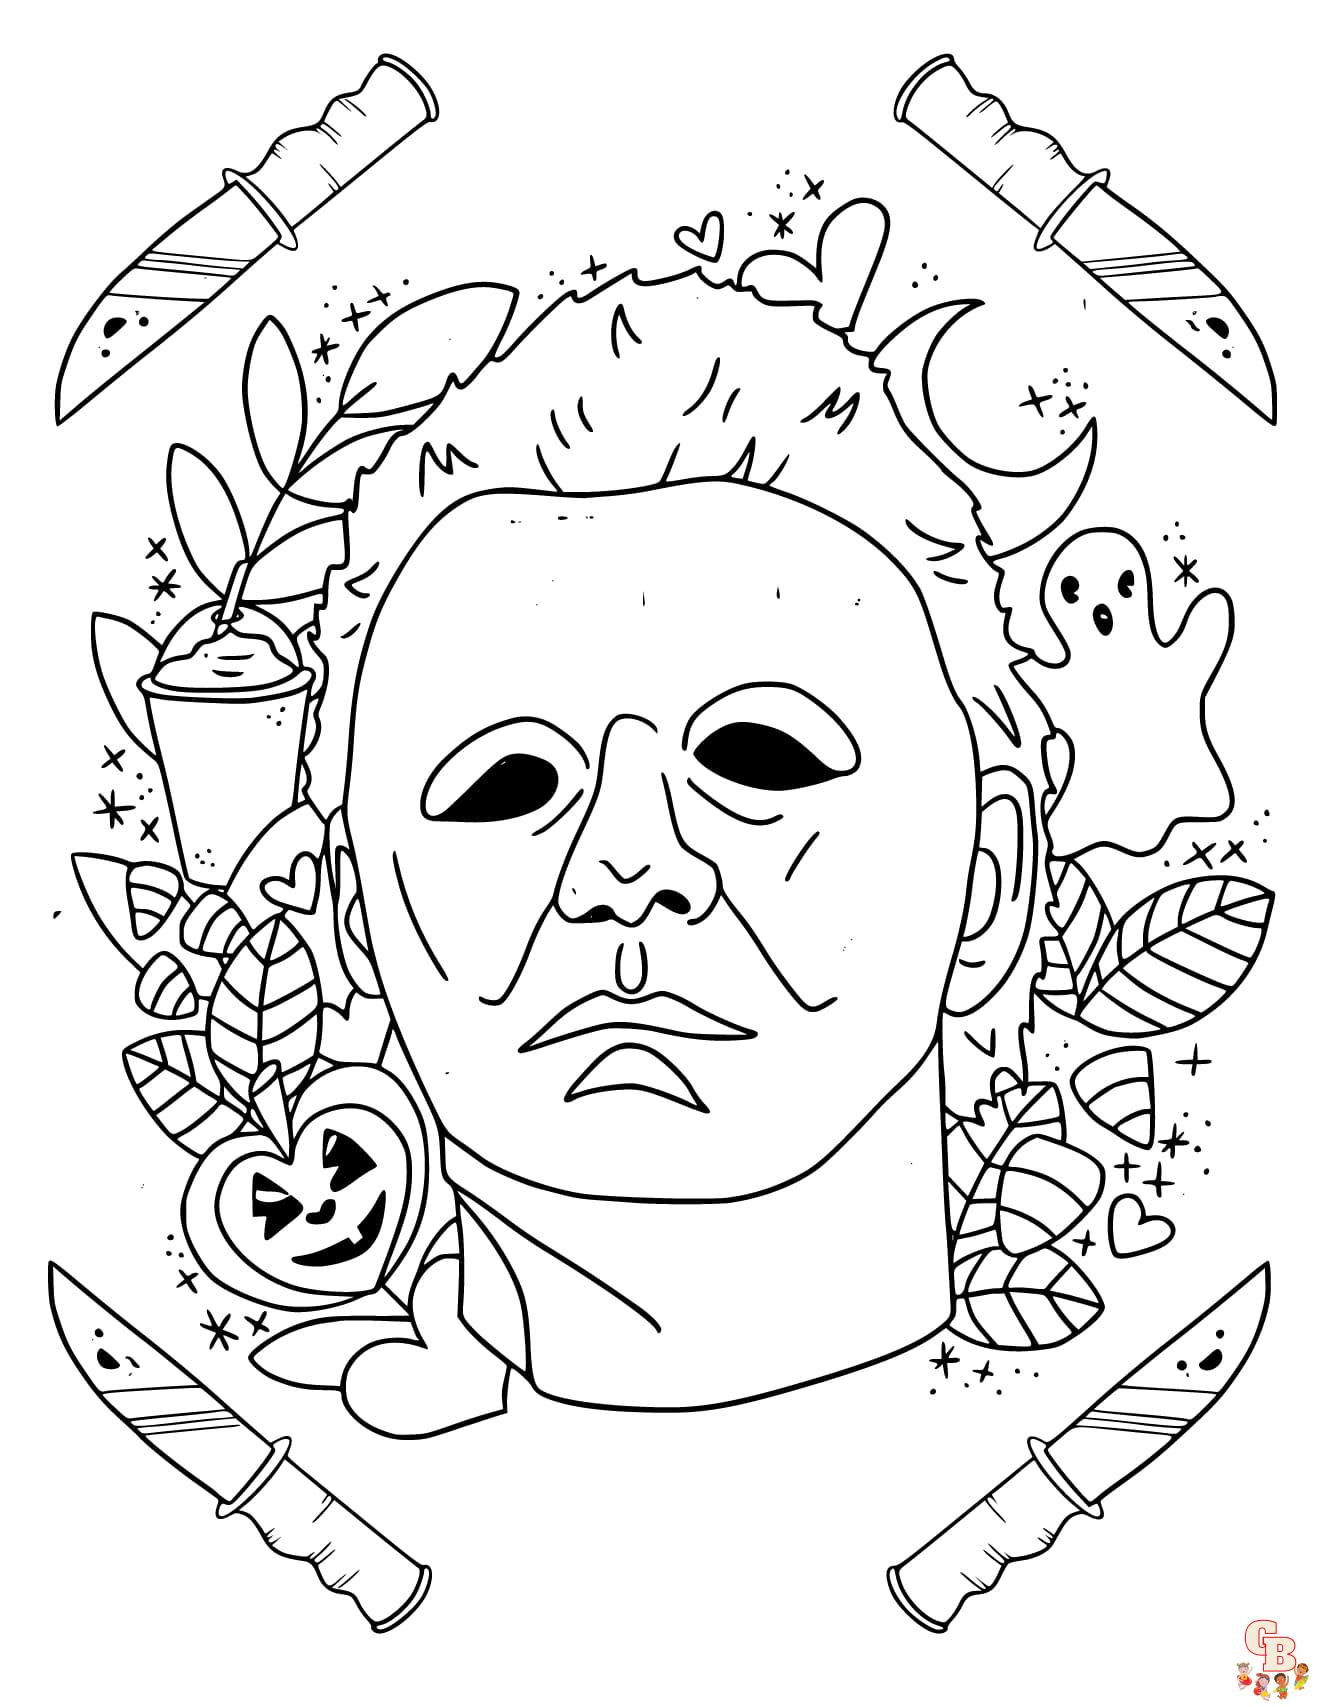 Horror michael myers - Dia das Bruxas - Coloring Pages for Adults